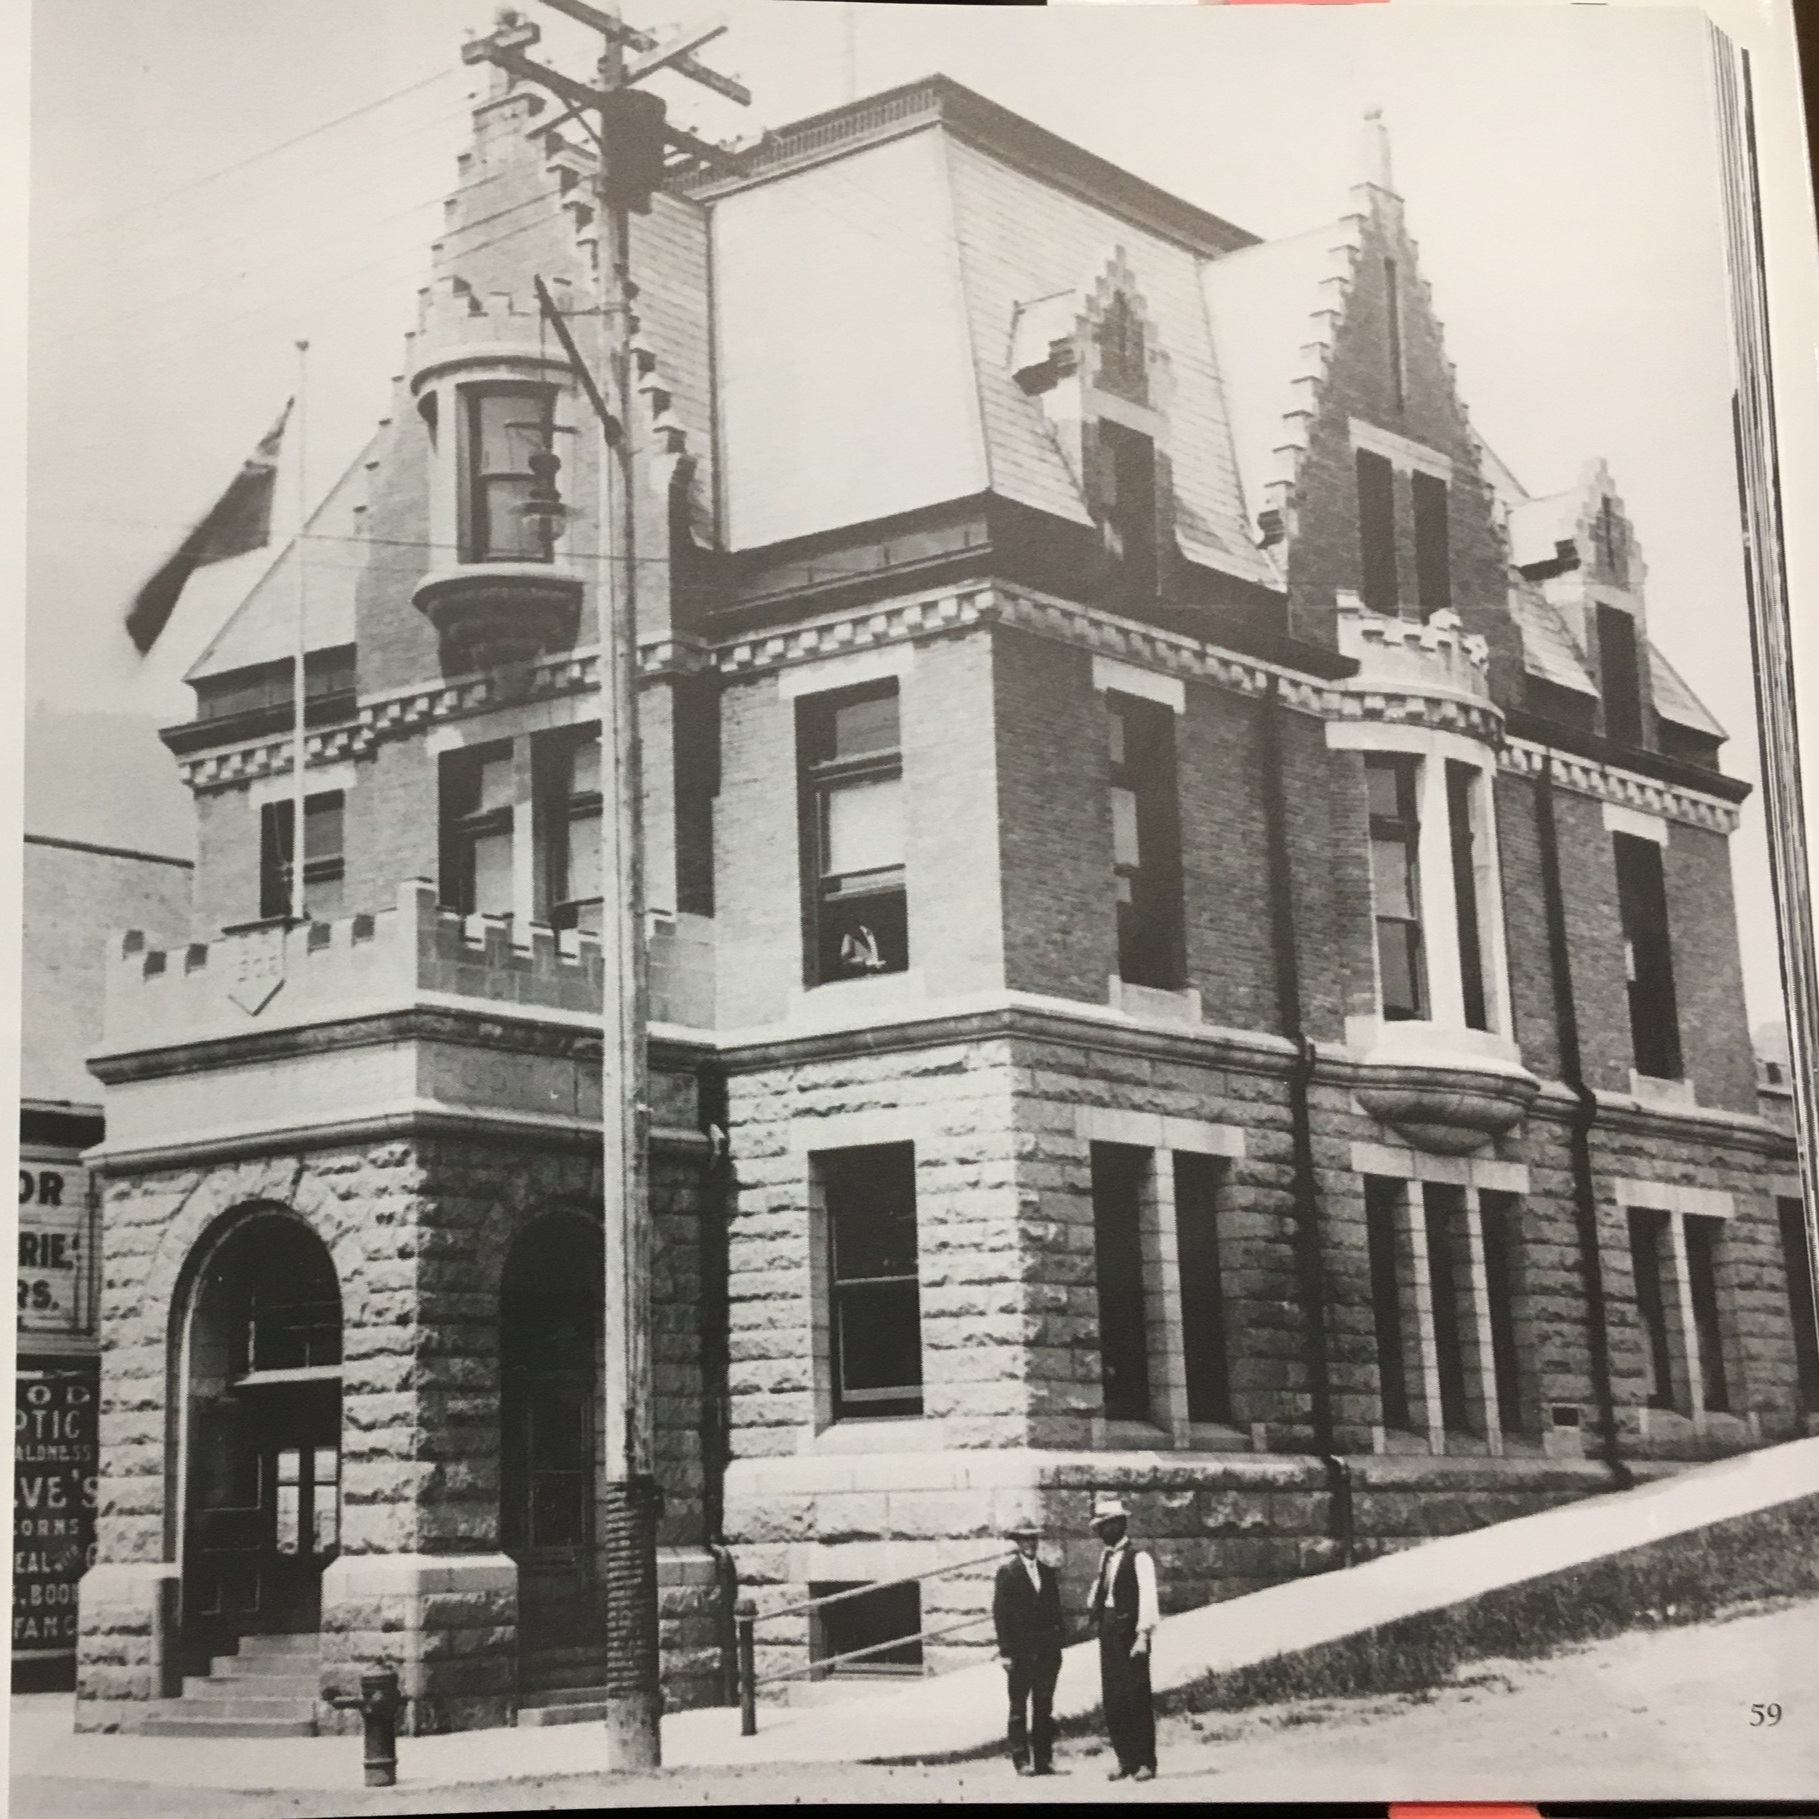 Rossland Post Office circa 1910 included the Customs Office.